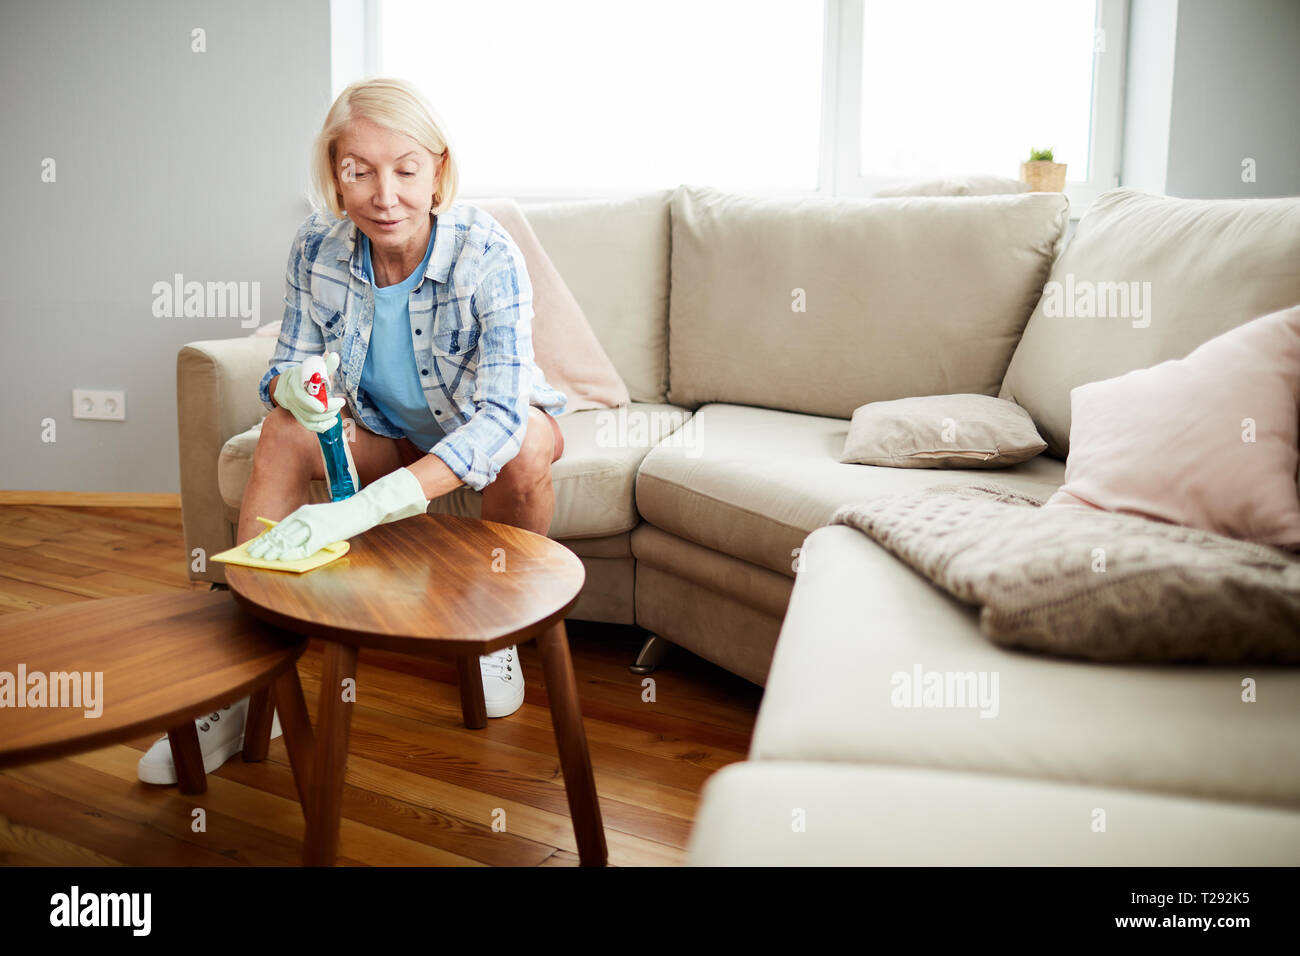 Mature woman removing dust from coffee table Stock Photo